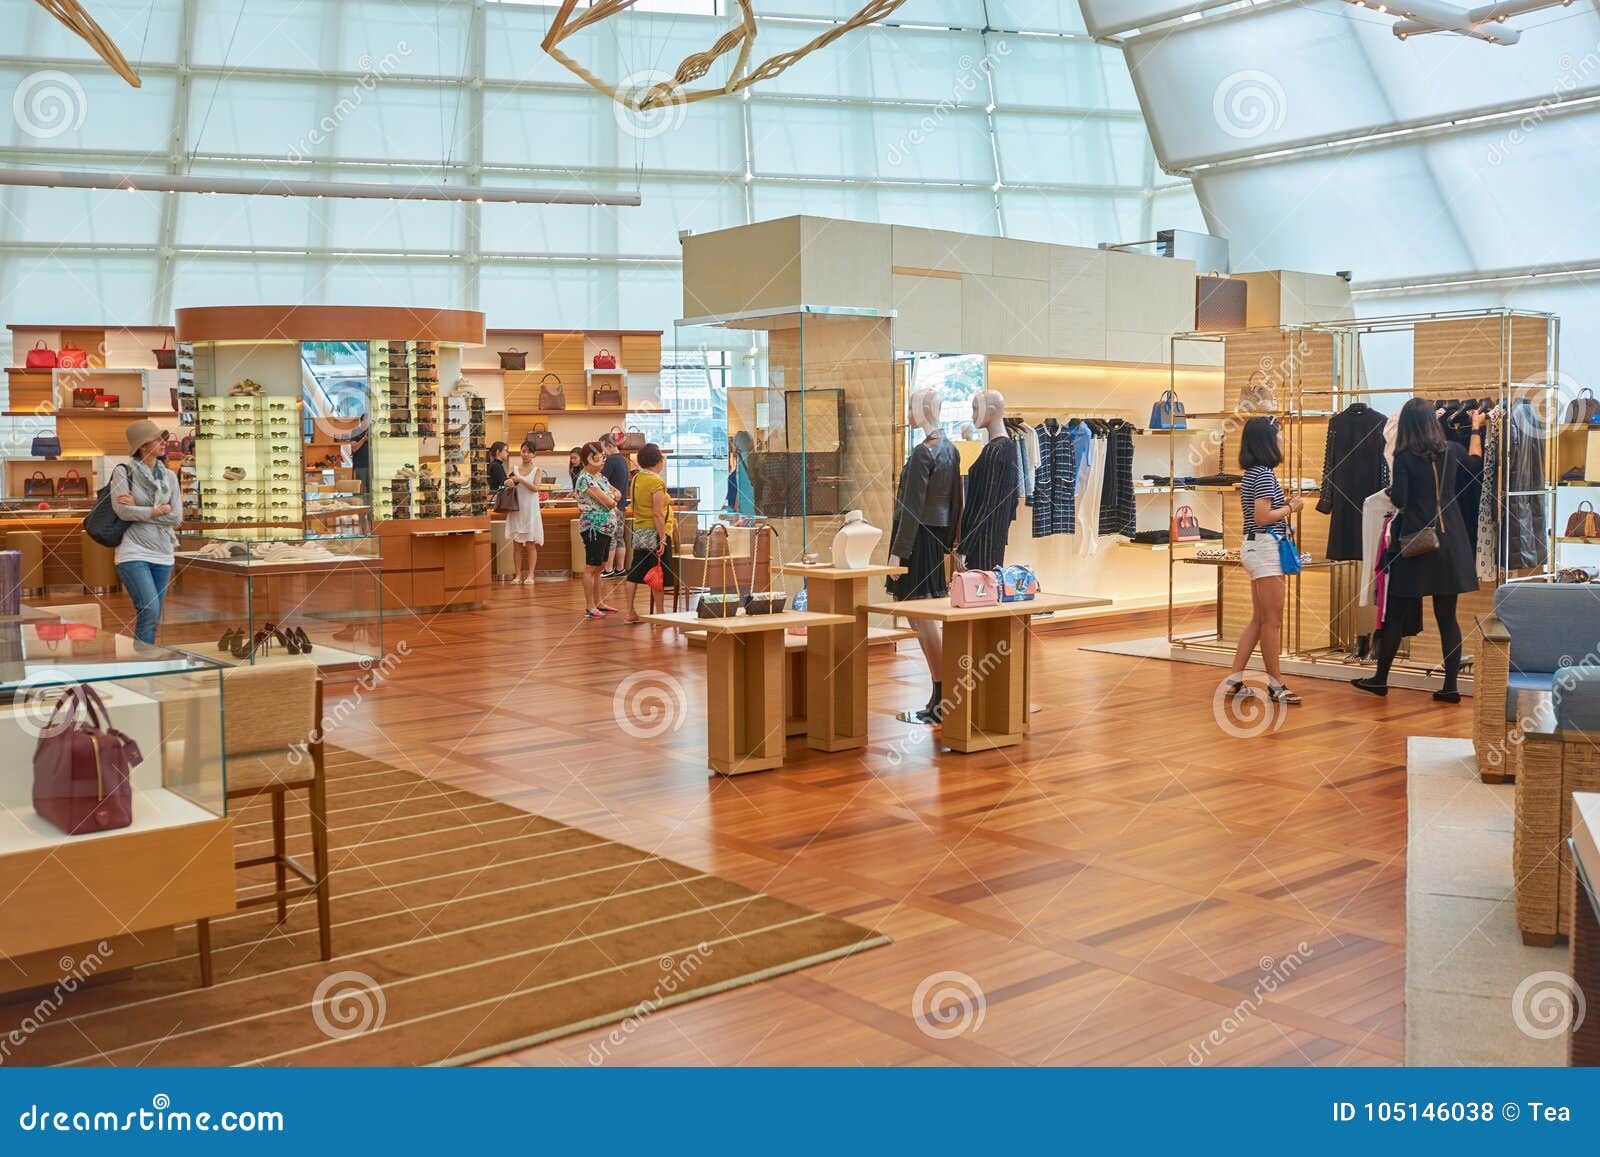 Louis Vuitton store editorial stock photo. Image of center - 105146038